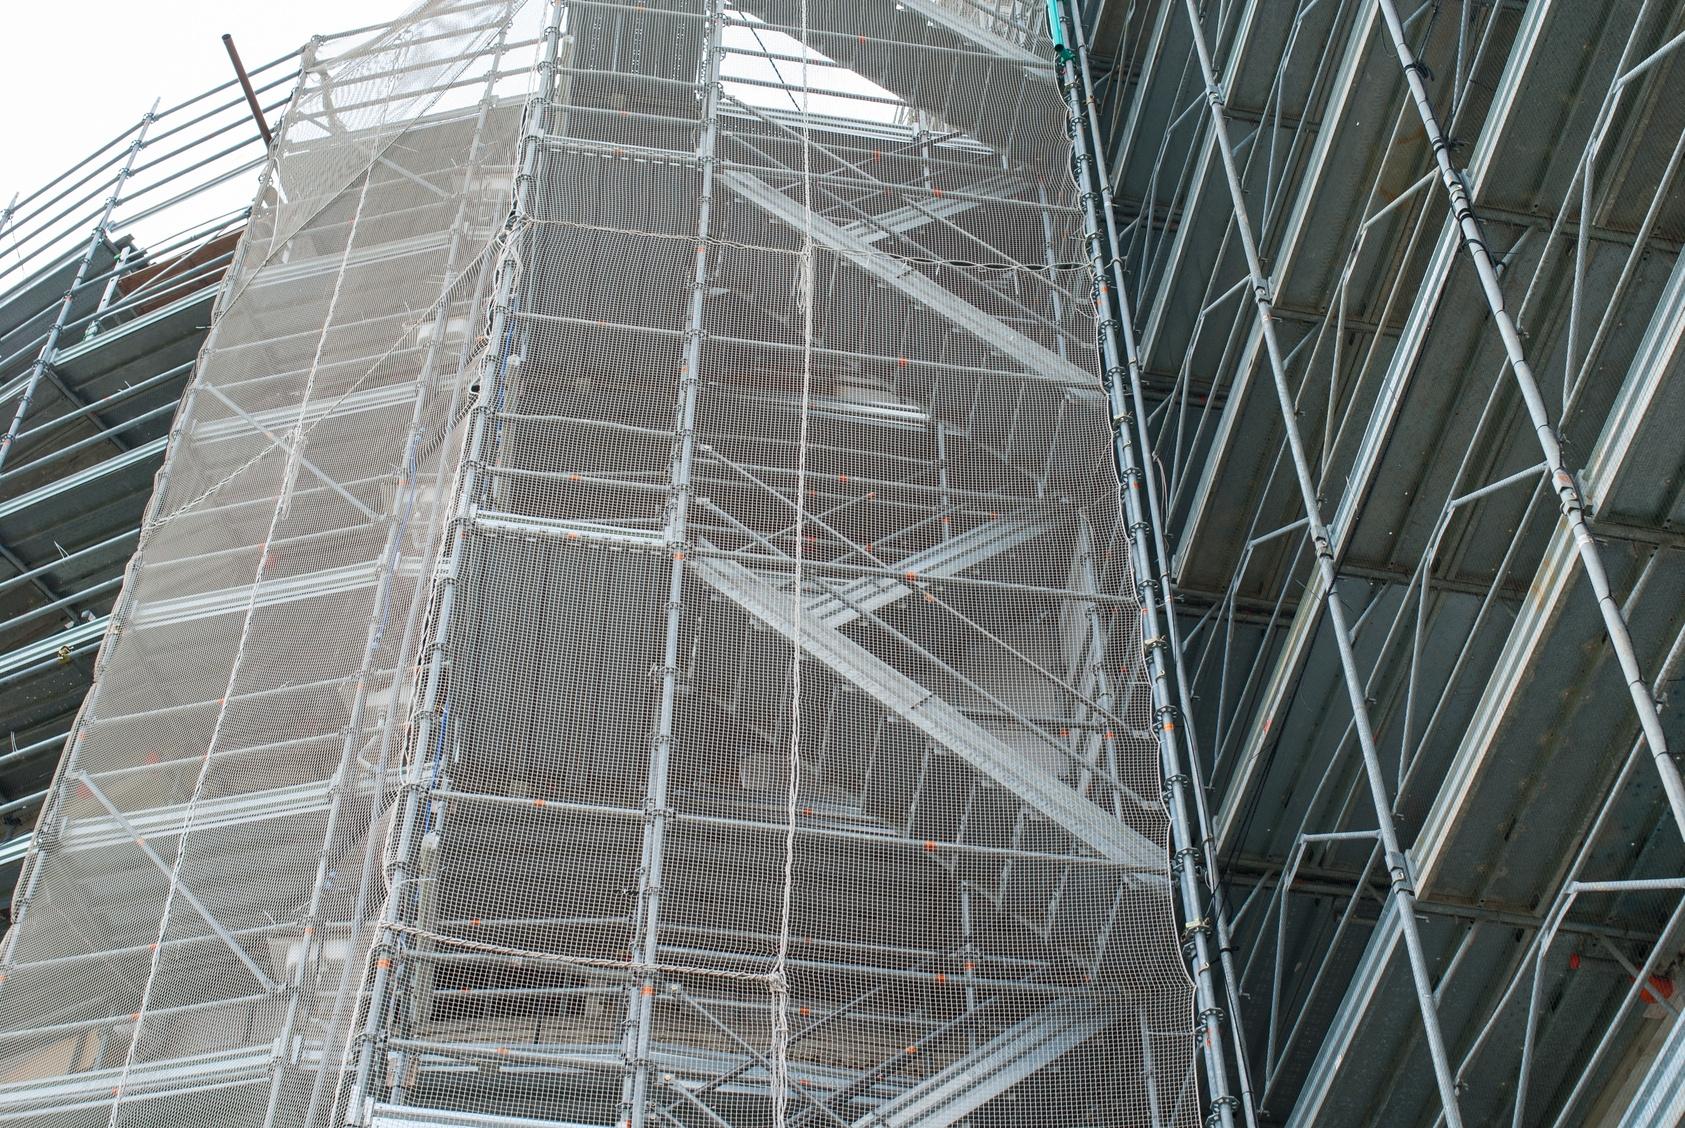 Scaffold Inspections for Job Site Safety